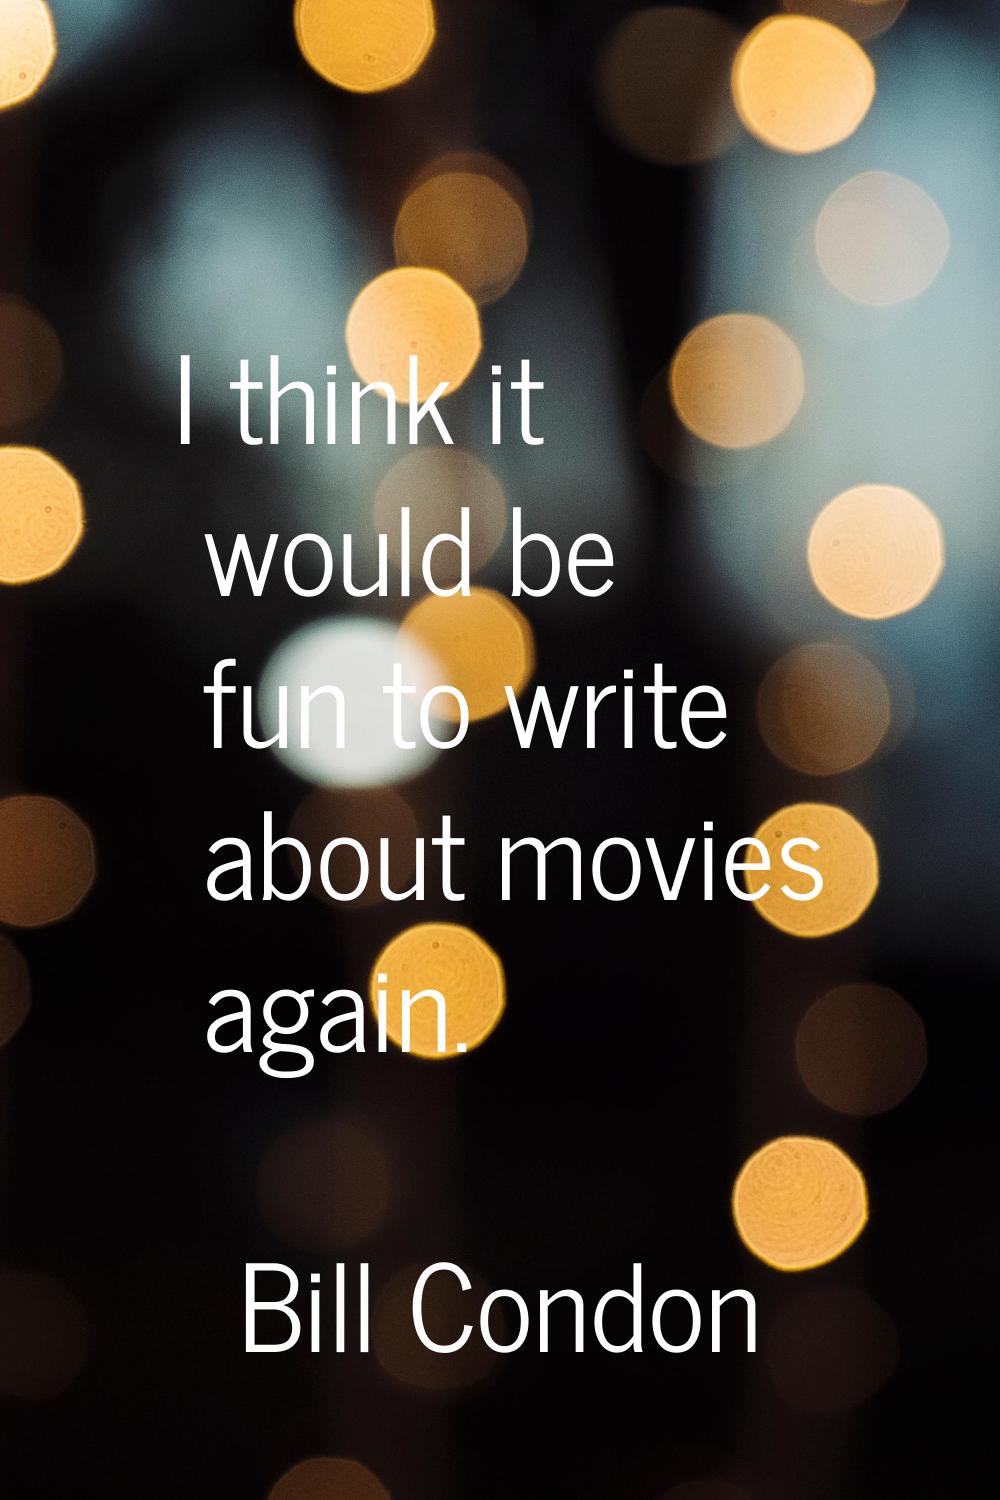 I think it would be fun to write about movies again.